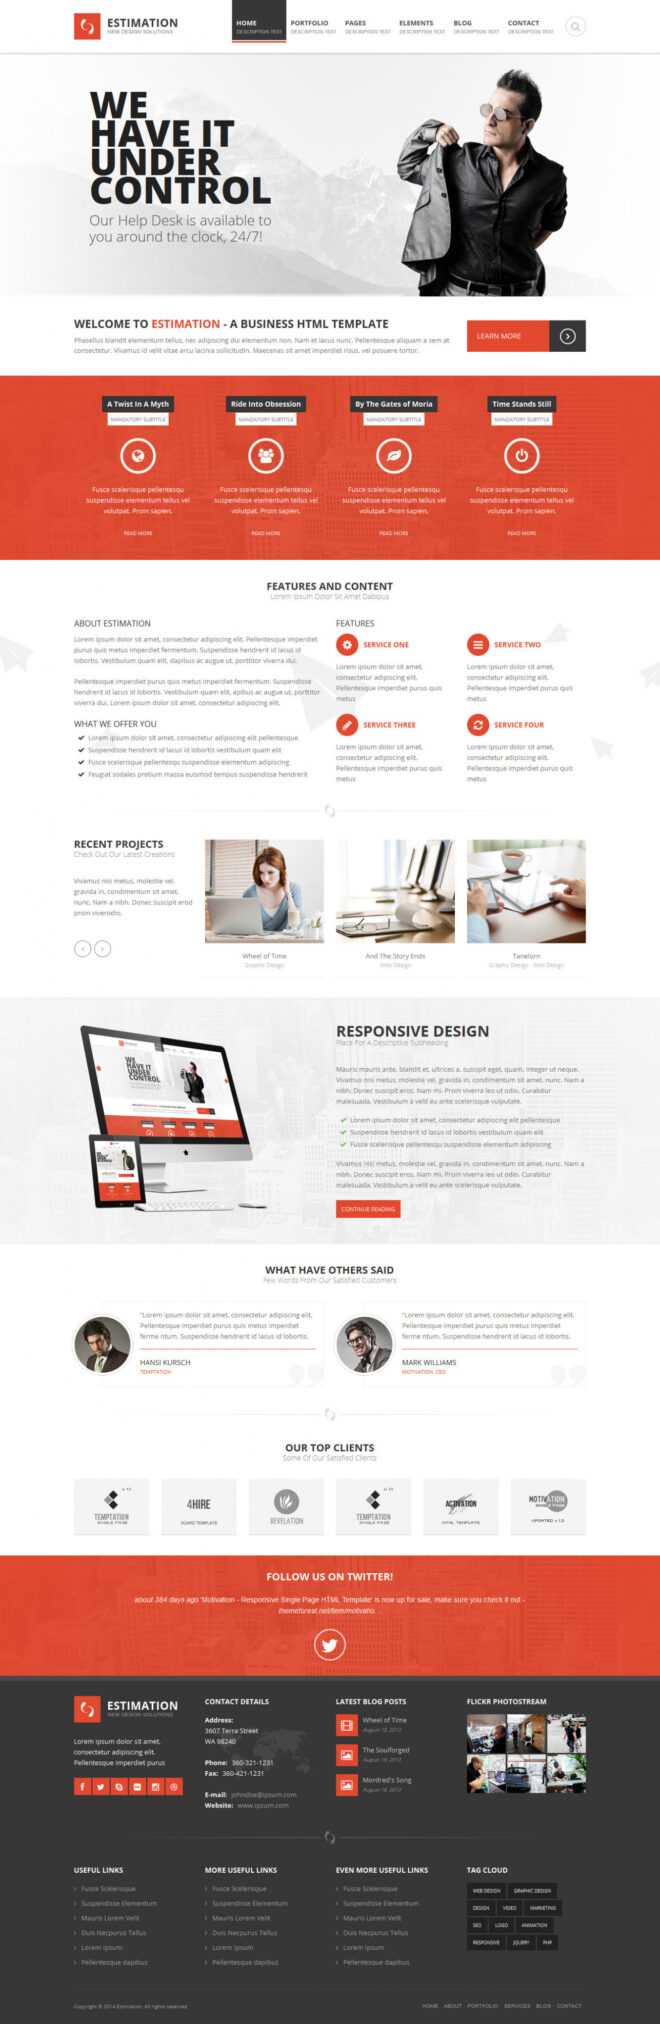 Estimation - Responsive Business Html Template regarding Estimation Responsive Business Html Template Free Download